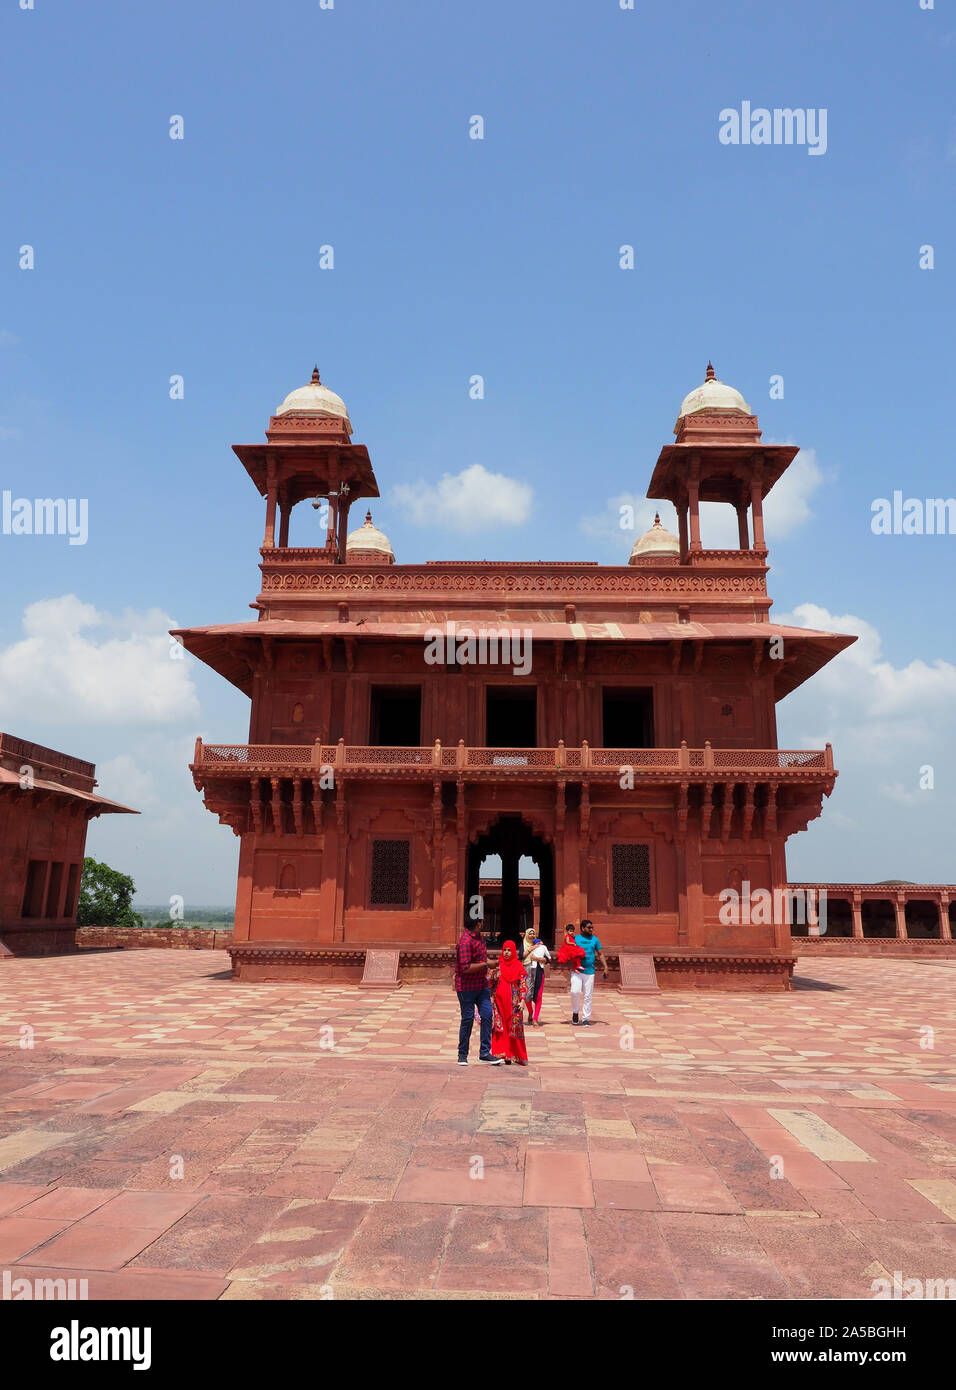 The deserted city complex of Fatehpur Sikri, India, once the capital of the country. Fatehpur Sikri town in the Agra District of Uttar Pradesh, India Stock Photo